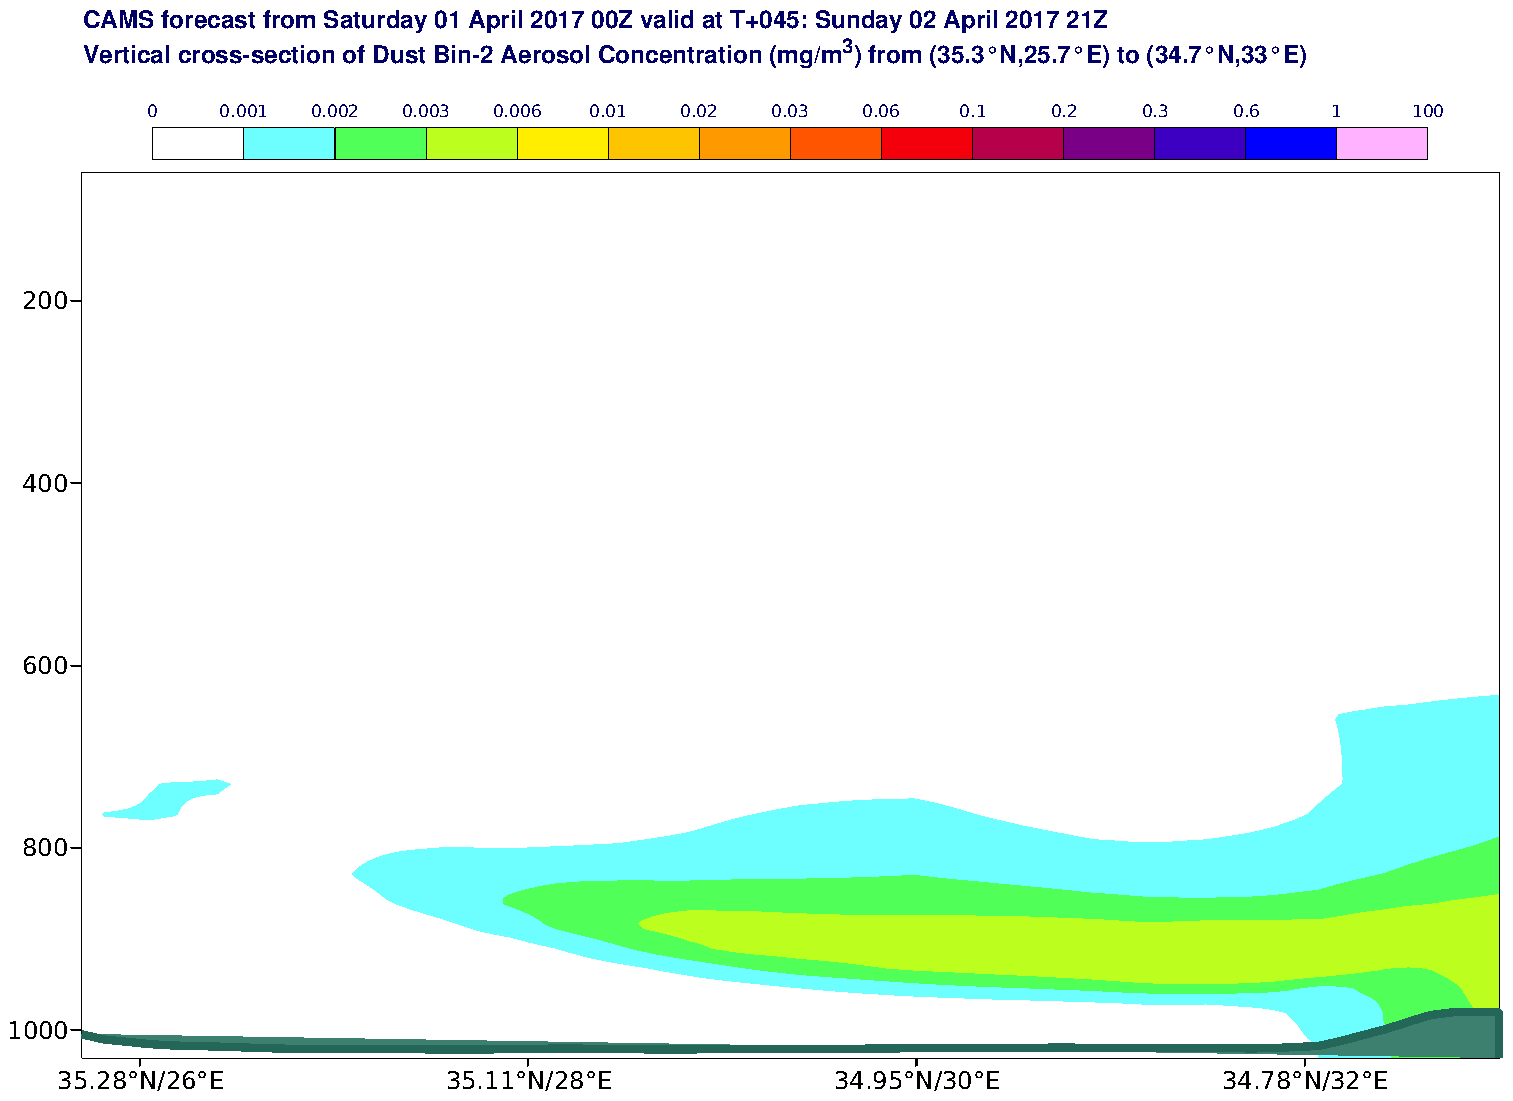 Vertical cross-section of Dust Bin-2 Aerosol Concentration (mg/m3) valid at T45 - 2017-04-02 21:00